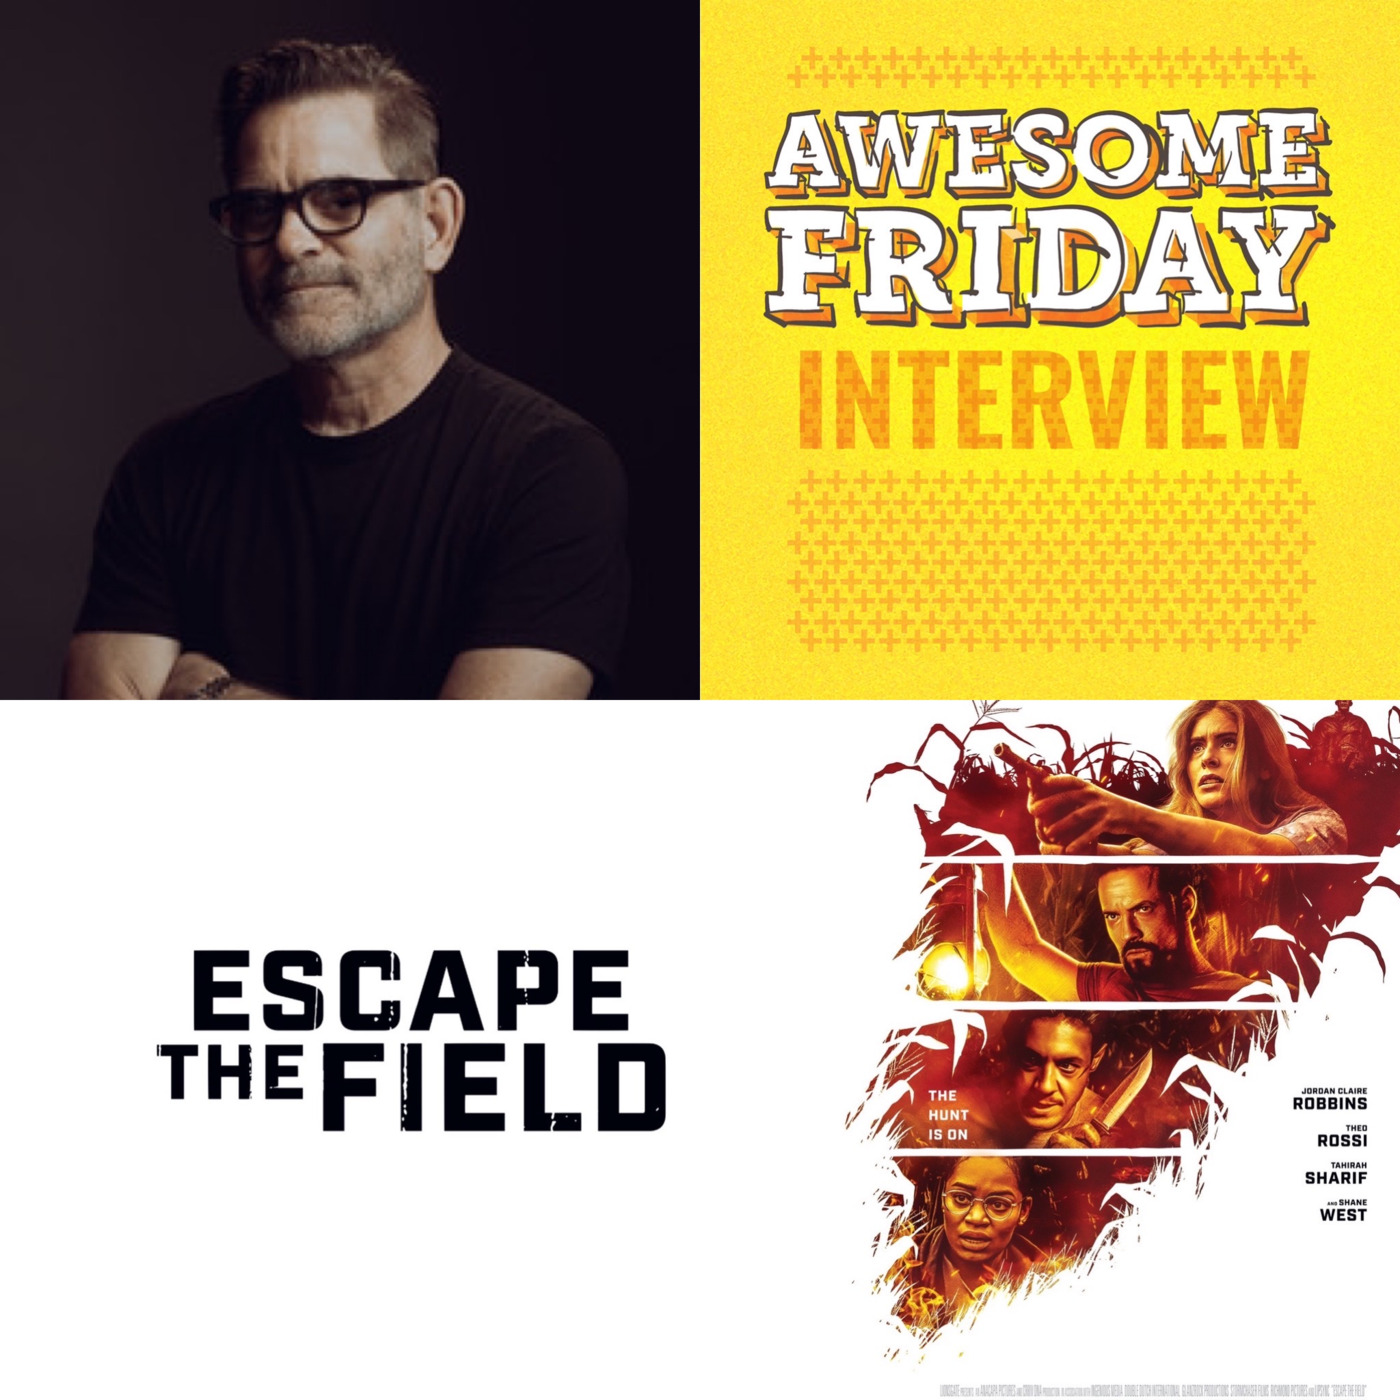 Episode 48: An Interview with Director Emerson Moore on his new film ’Escape the Field’